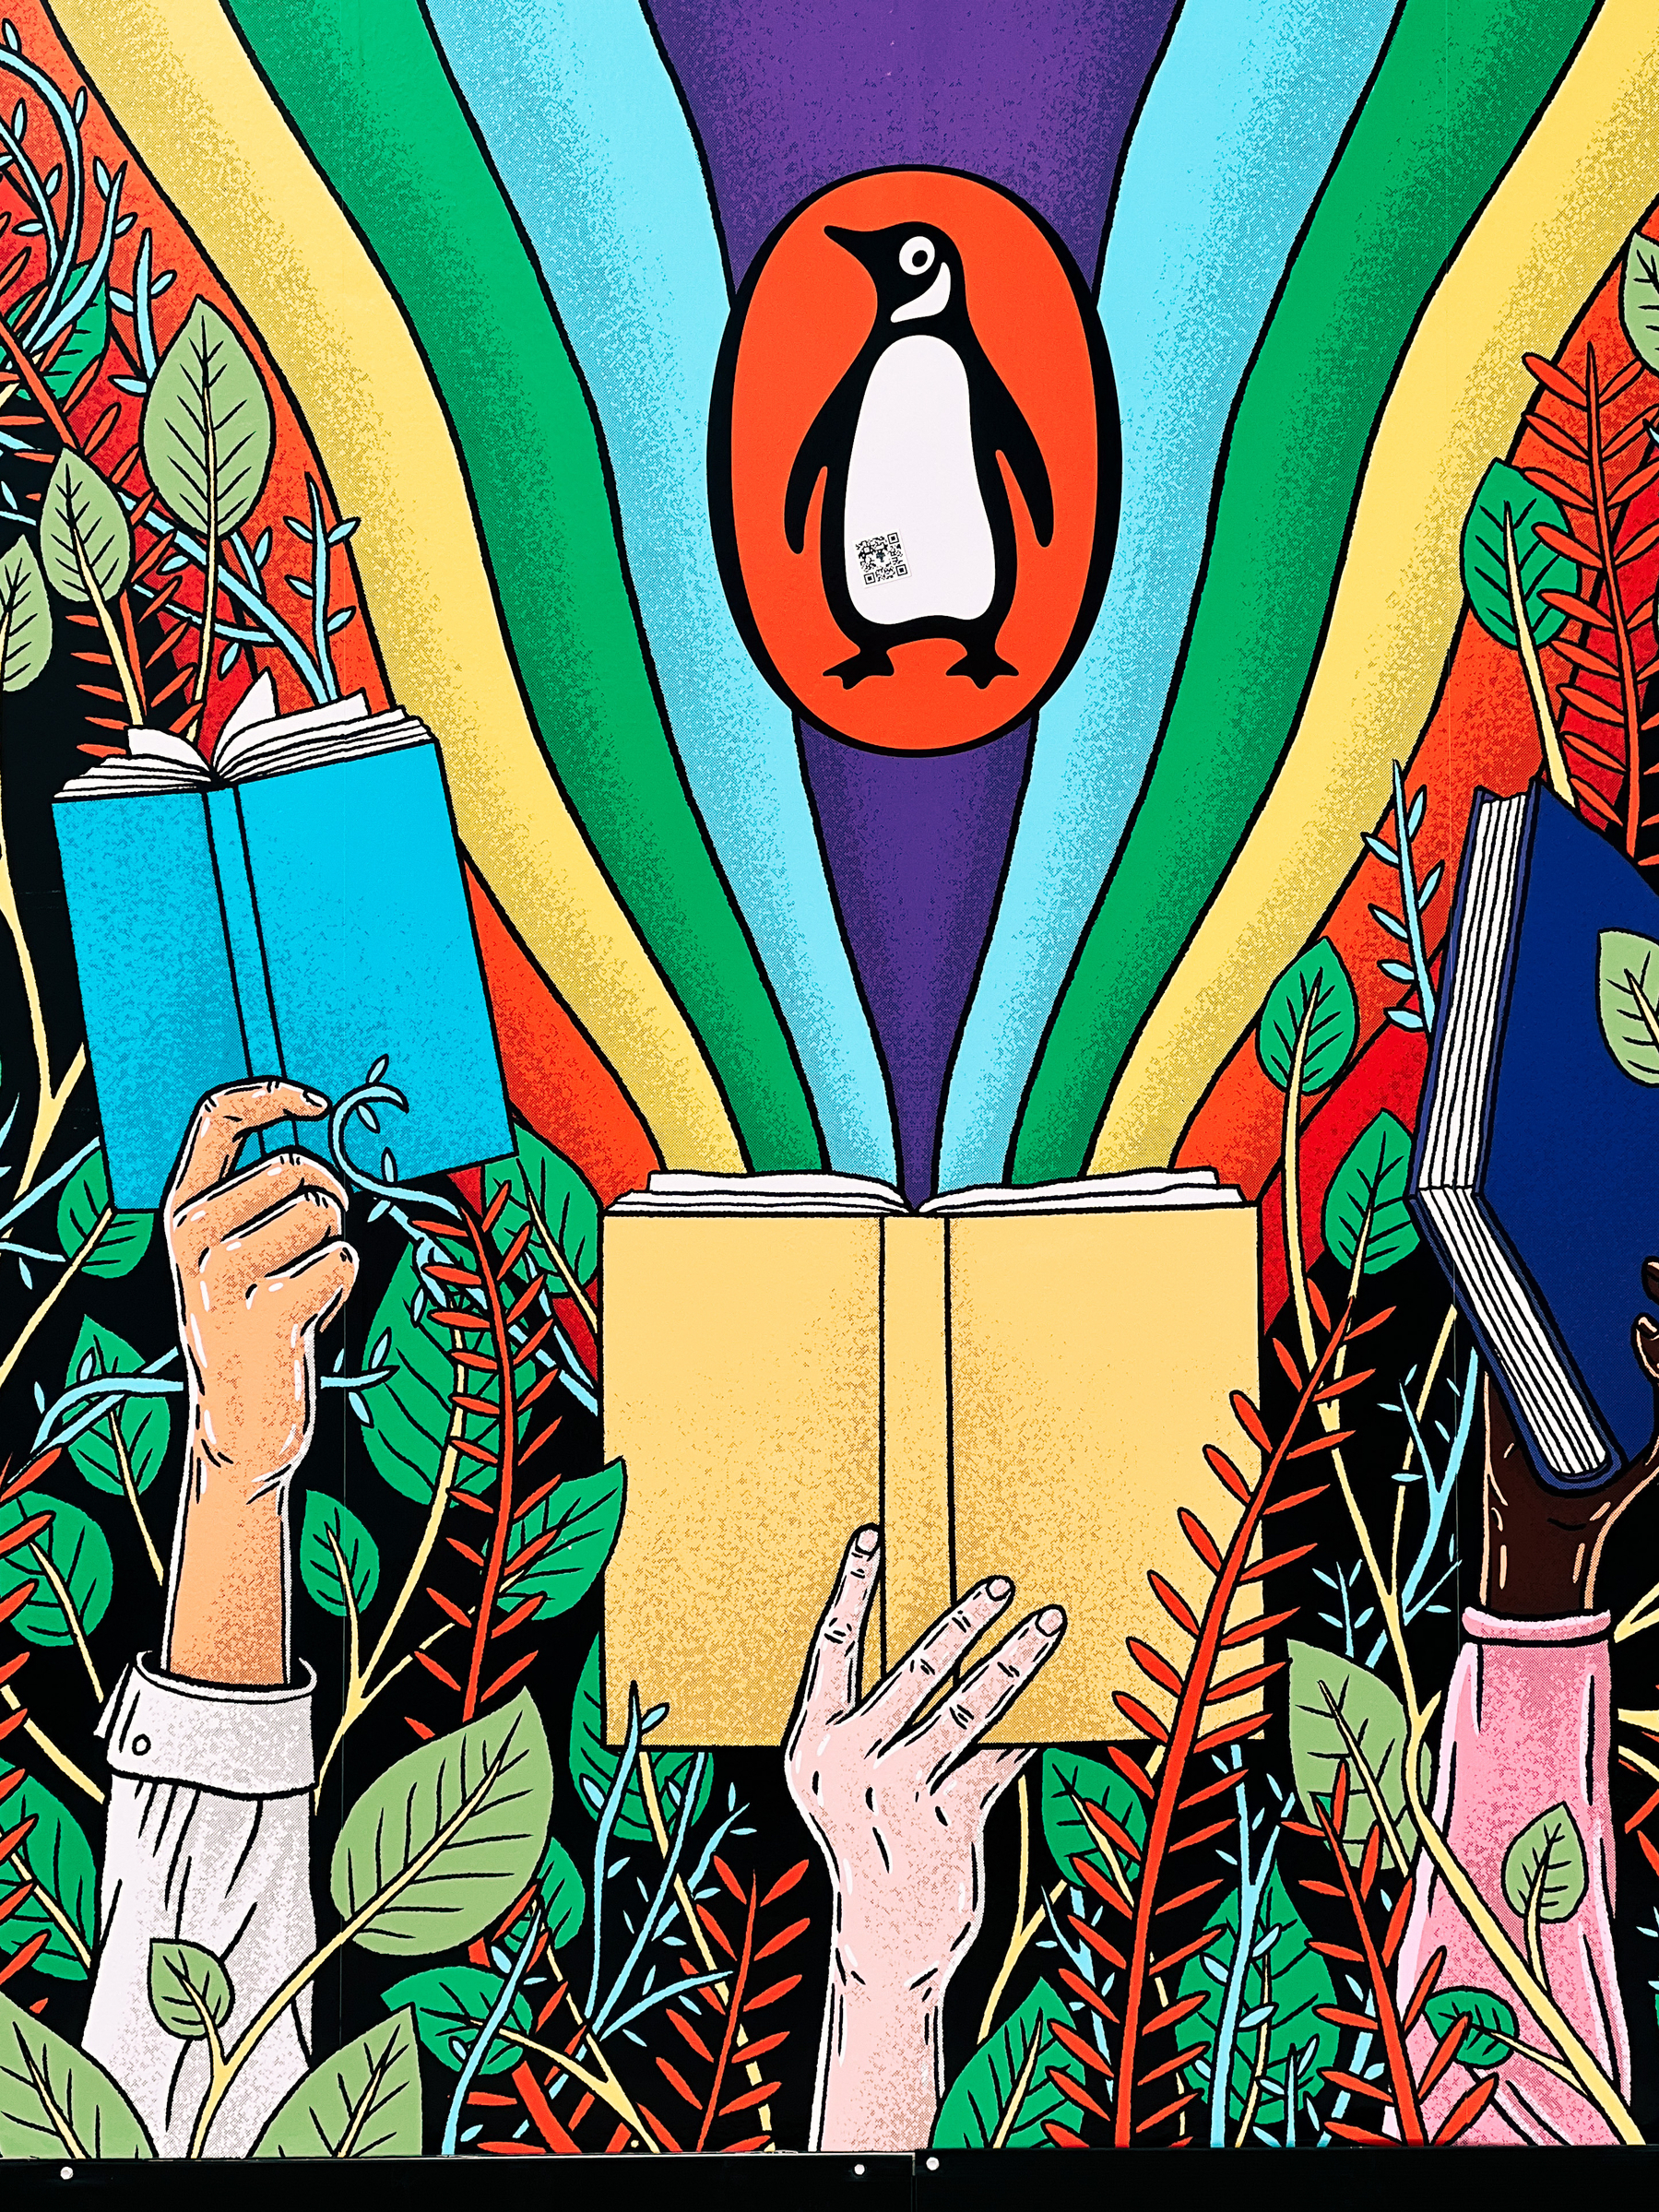 Illustration with hands holding books, and the Penguin publisher logo on top. 